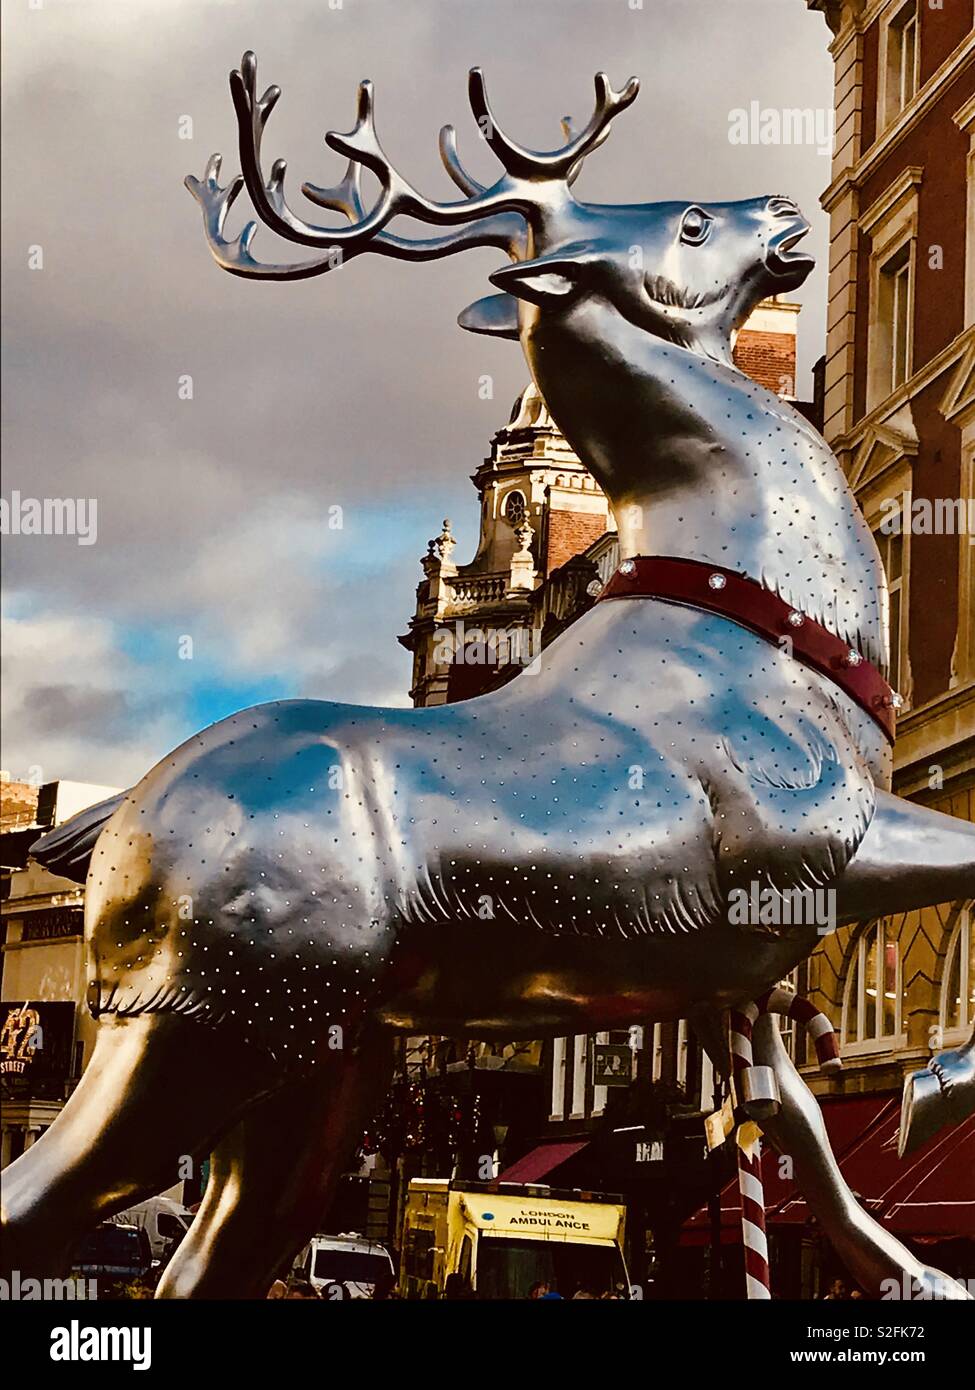 Christmas celebrations and decorations, Reindeer statue in Covent Garden, London, England, UK Stock Photo